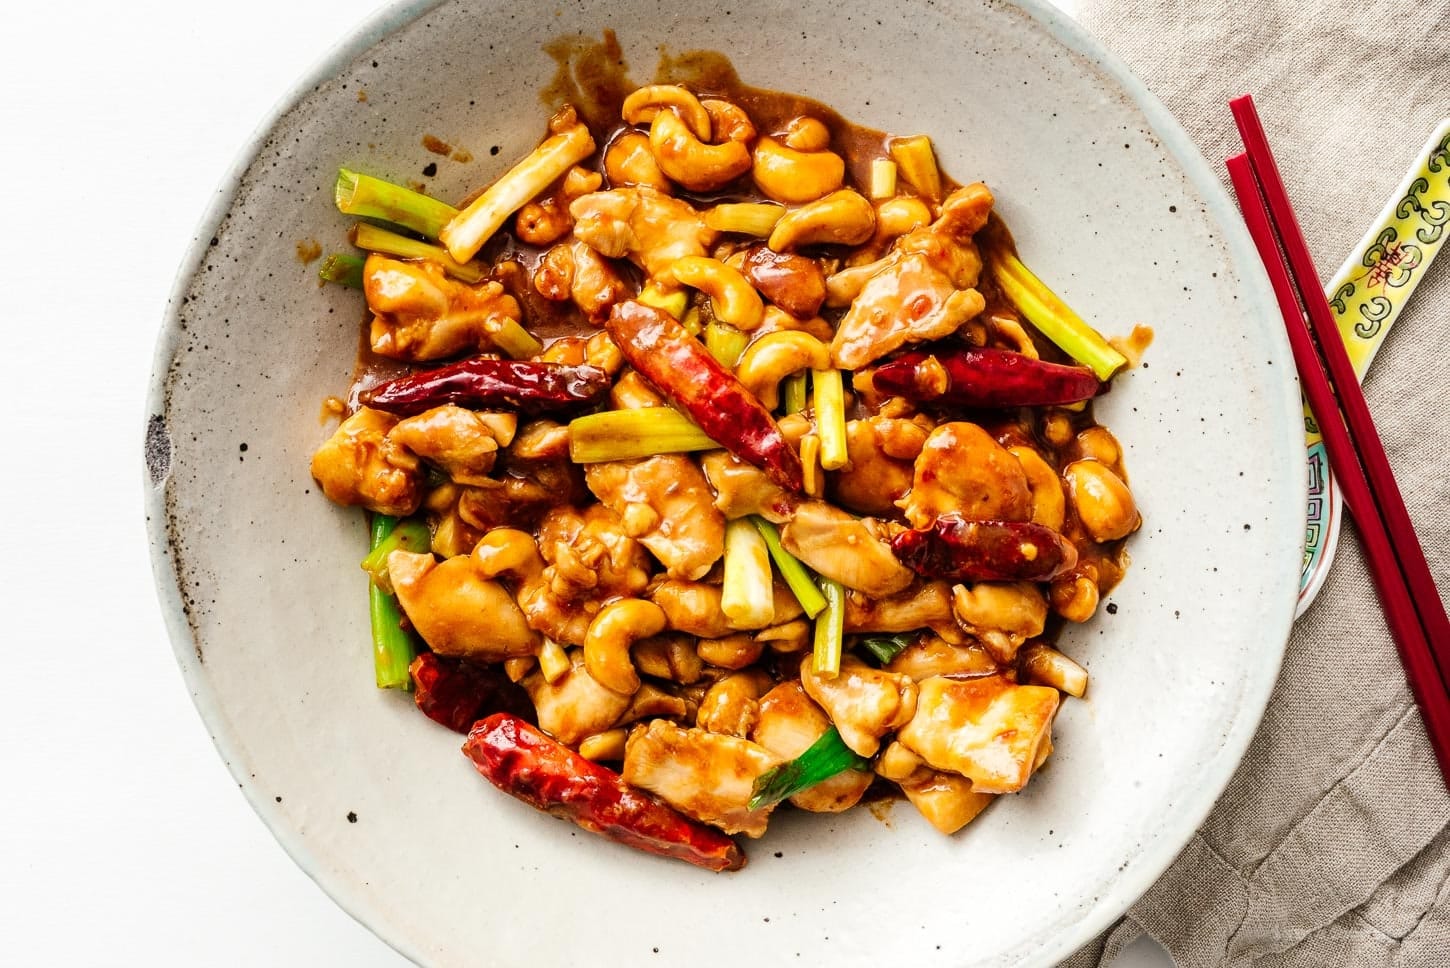 polo kung pao | www.http://elcomensal.es/